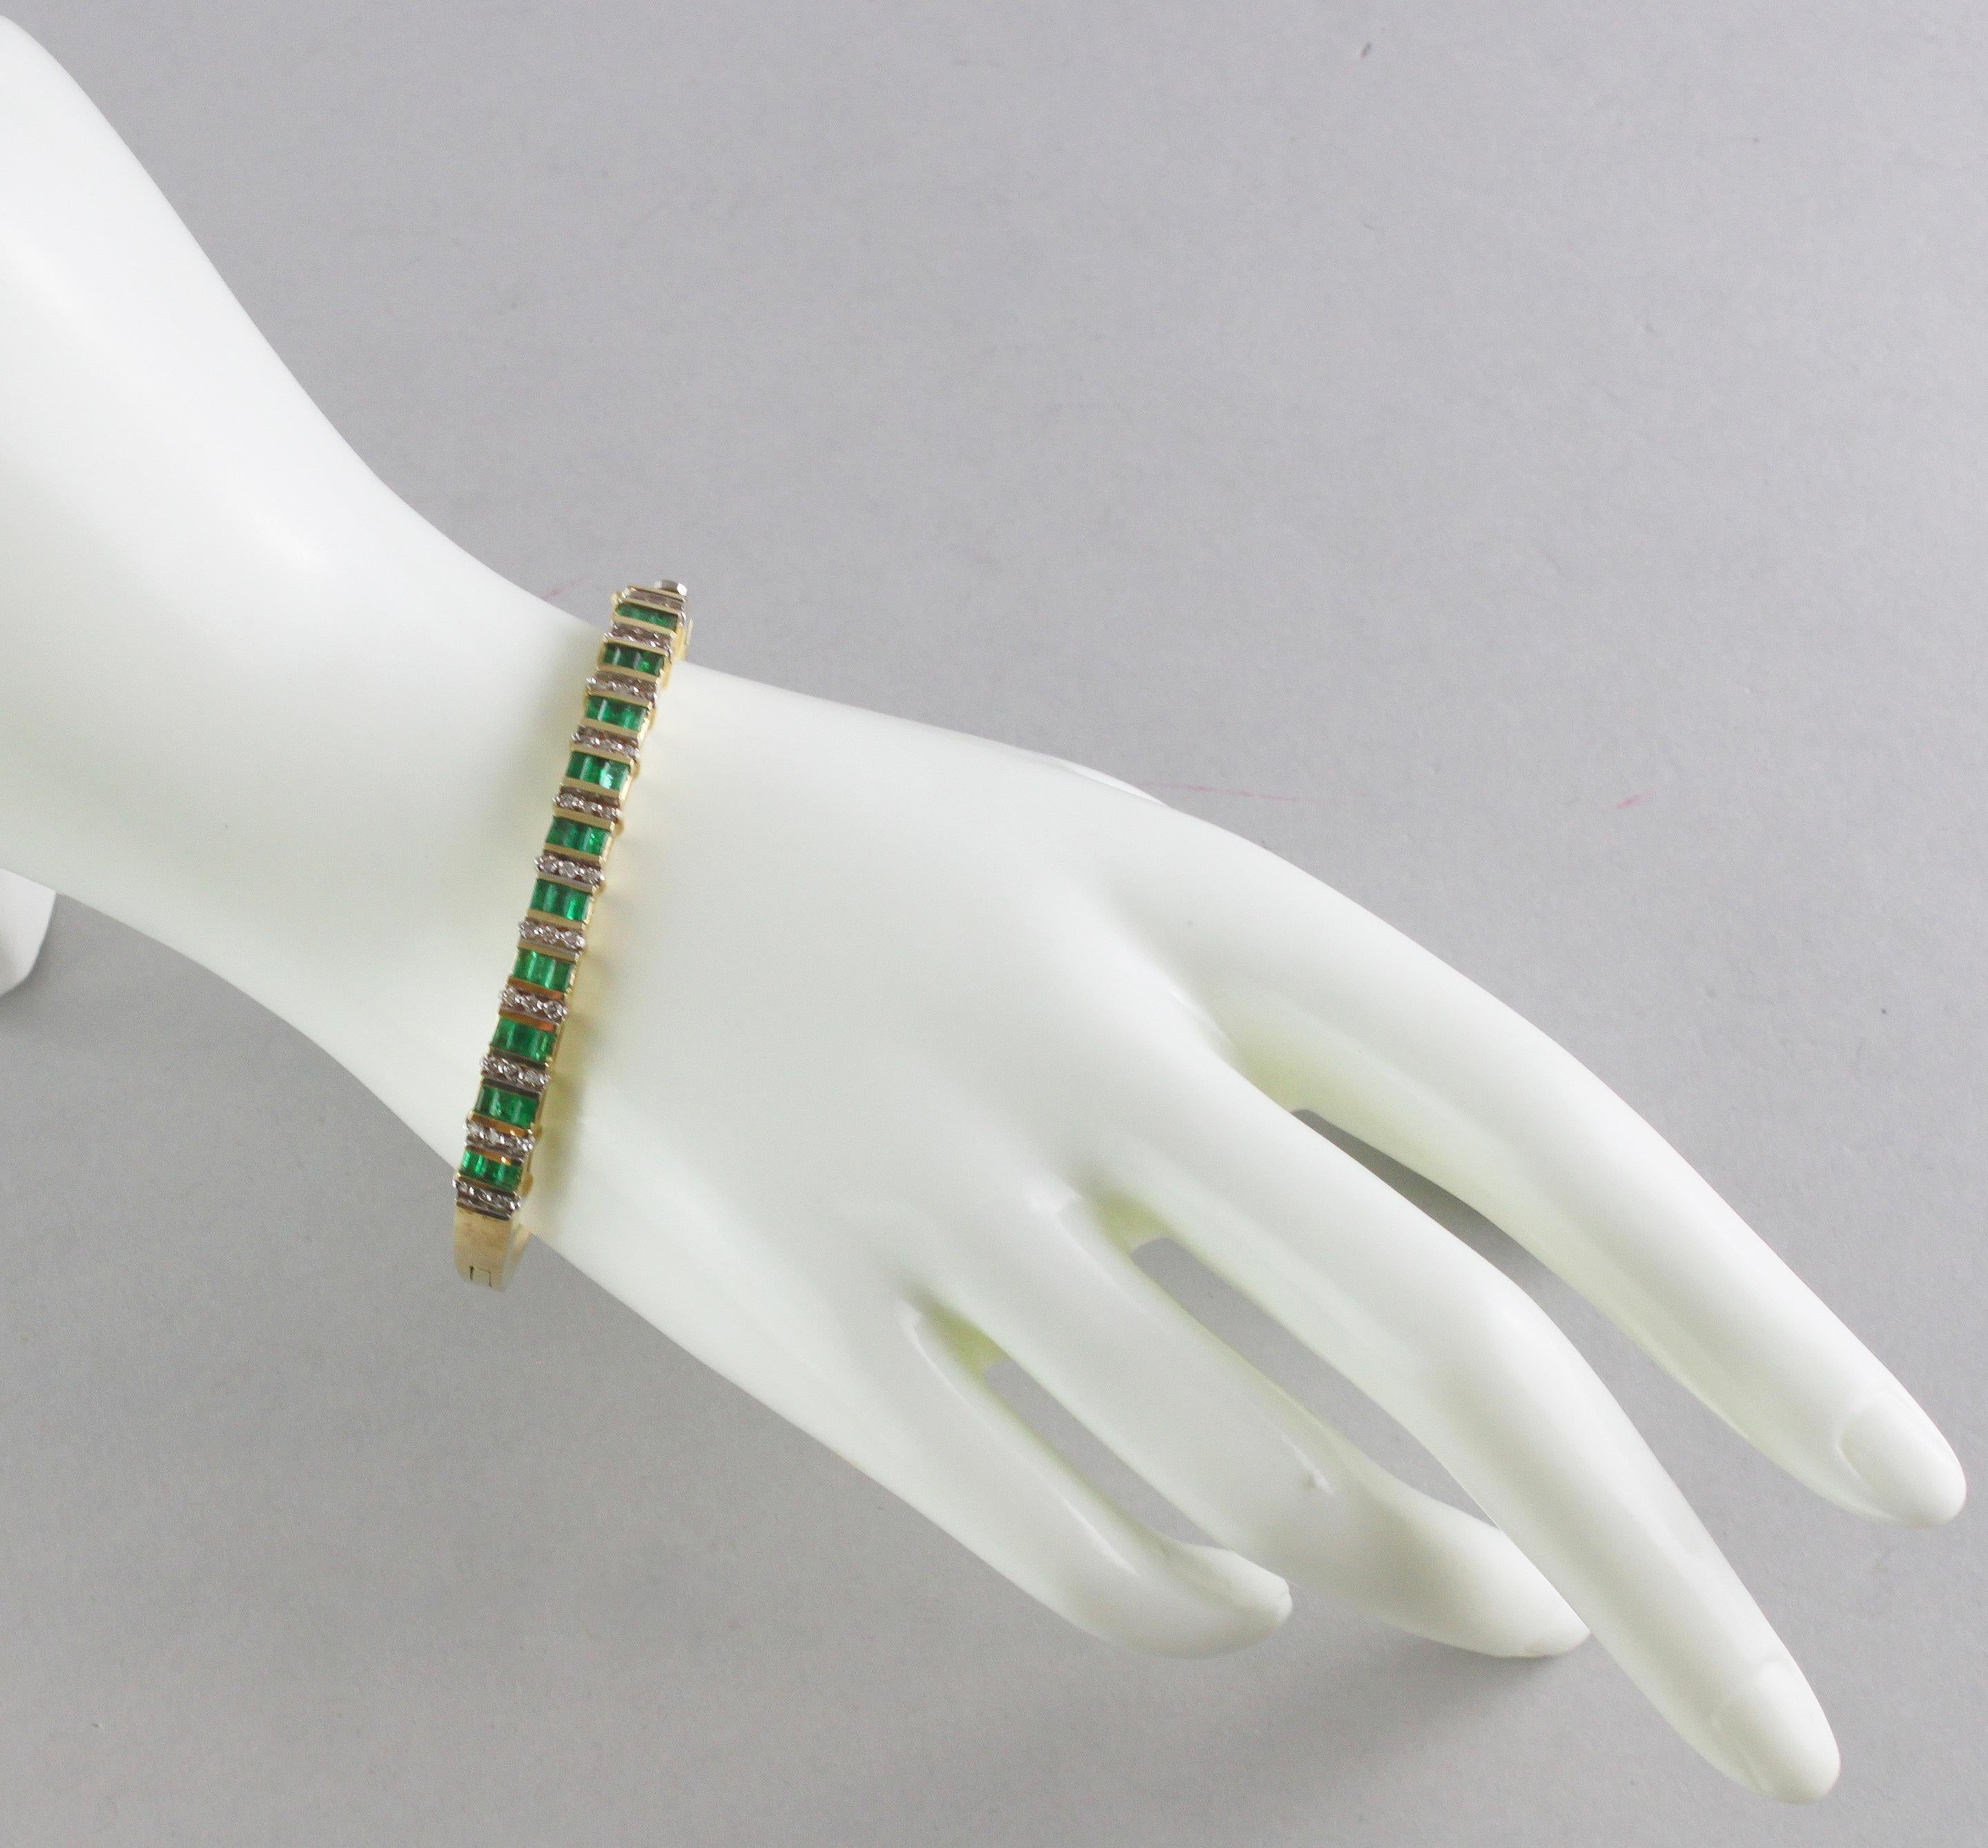 Antique 18kt yellow gold ladies bangle, with emeralds and diamonds.
European Circa 1940.
Tested positive for 18kt gold.

Dimensions -
Size : 7 x 5.9 x 0.75 cm
Weight: 28 grams total

Emeralds - 
Cut : Baguette
Quantity : 30 emeralds
Approx total